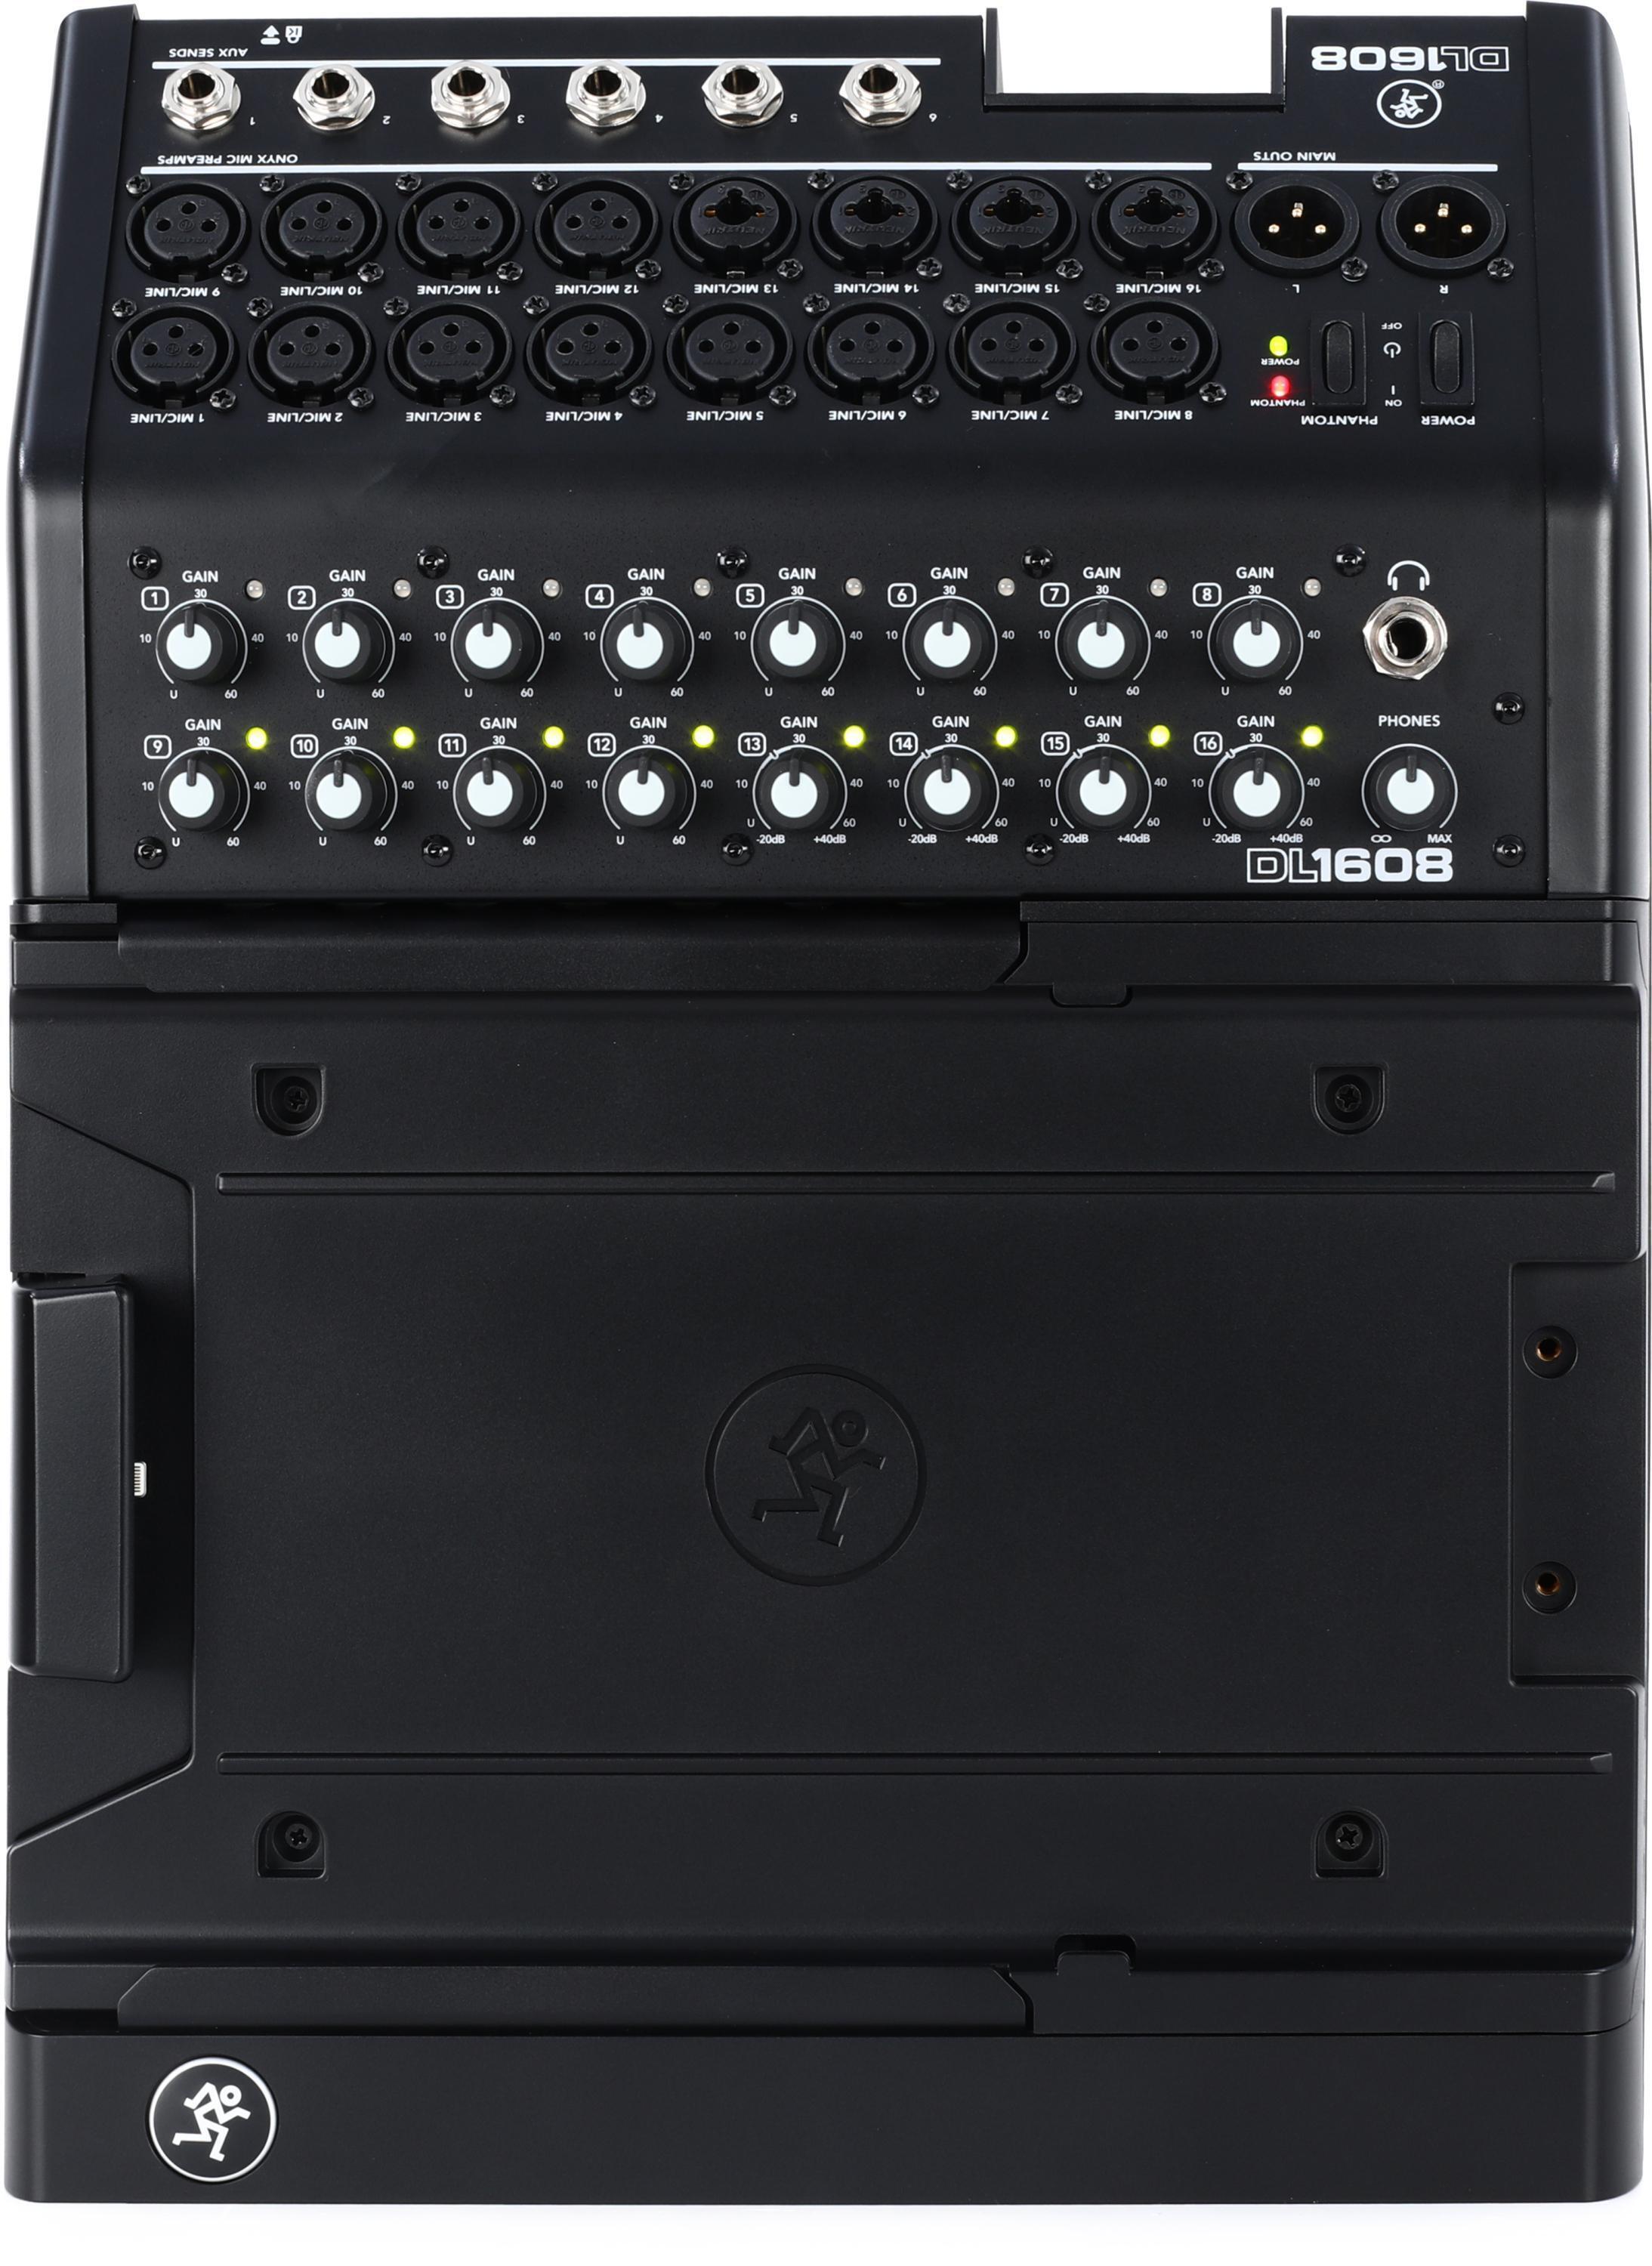 Mackie DL1608 16-channel iPad-controlled Digital Mixer | Sweetwater